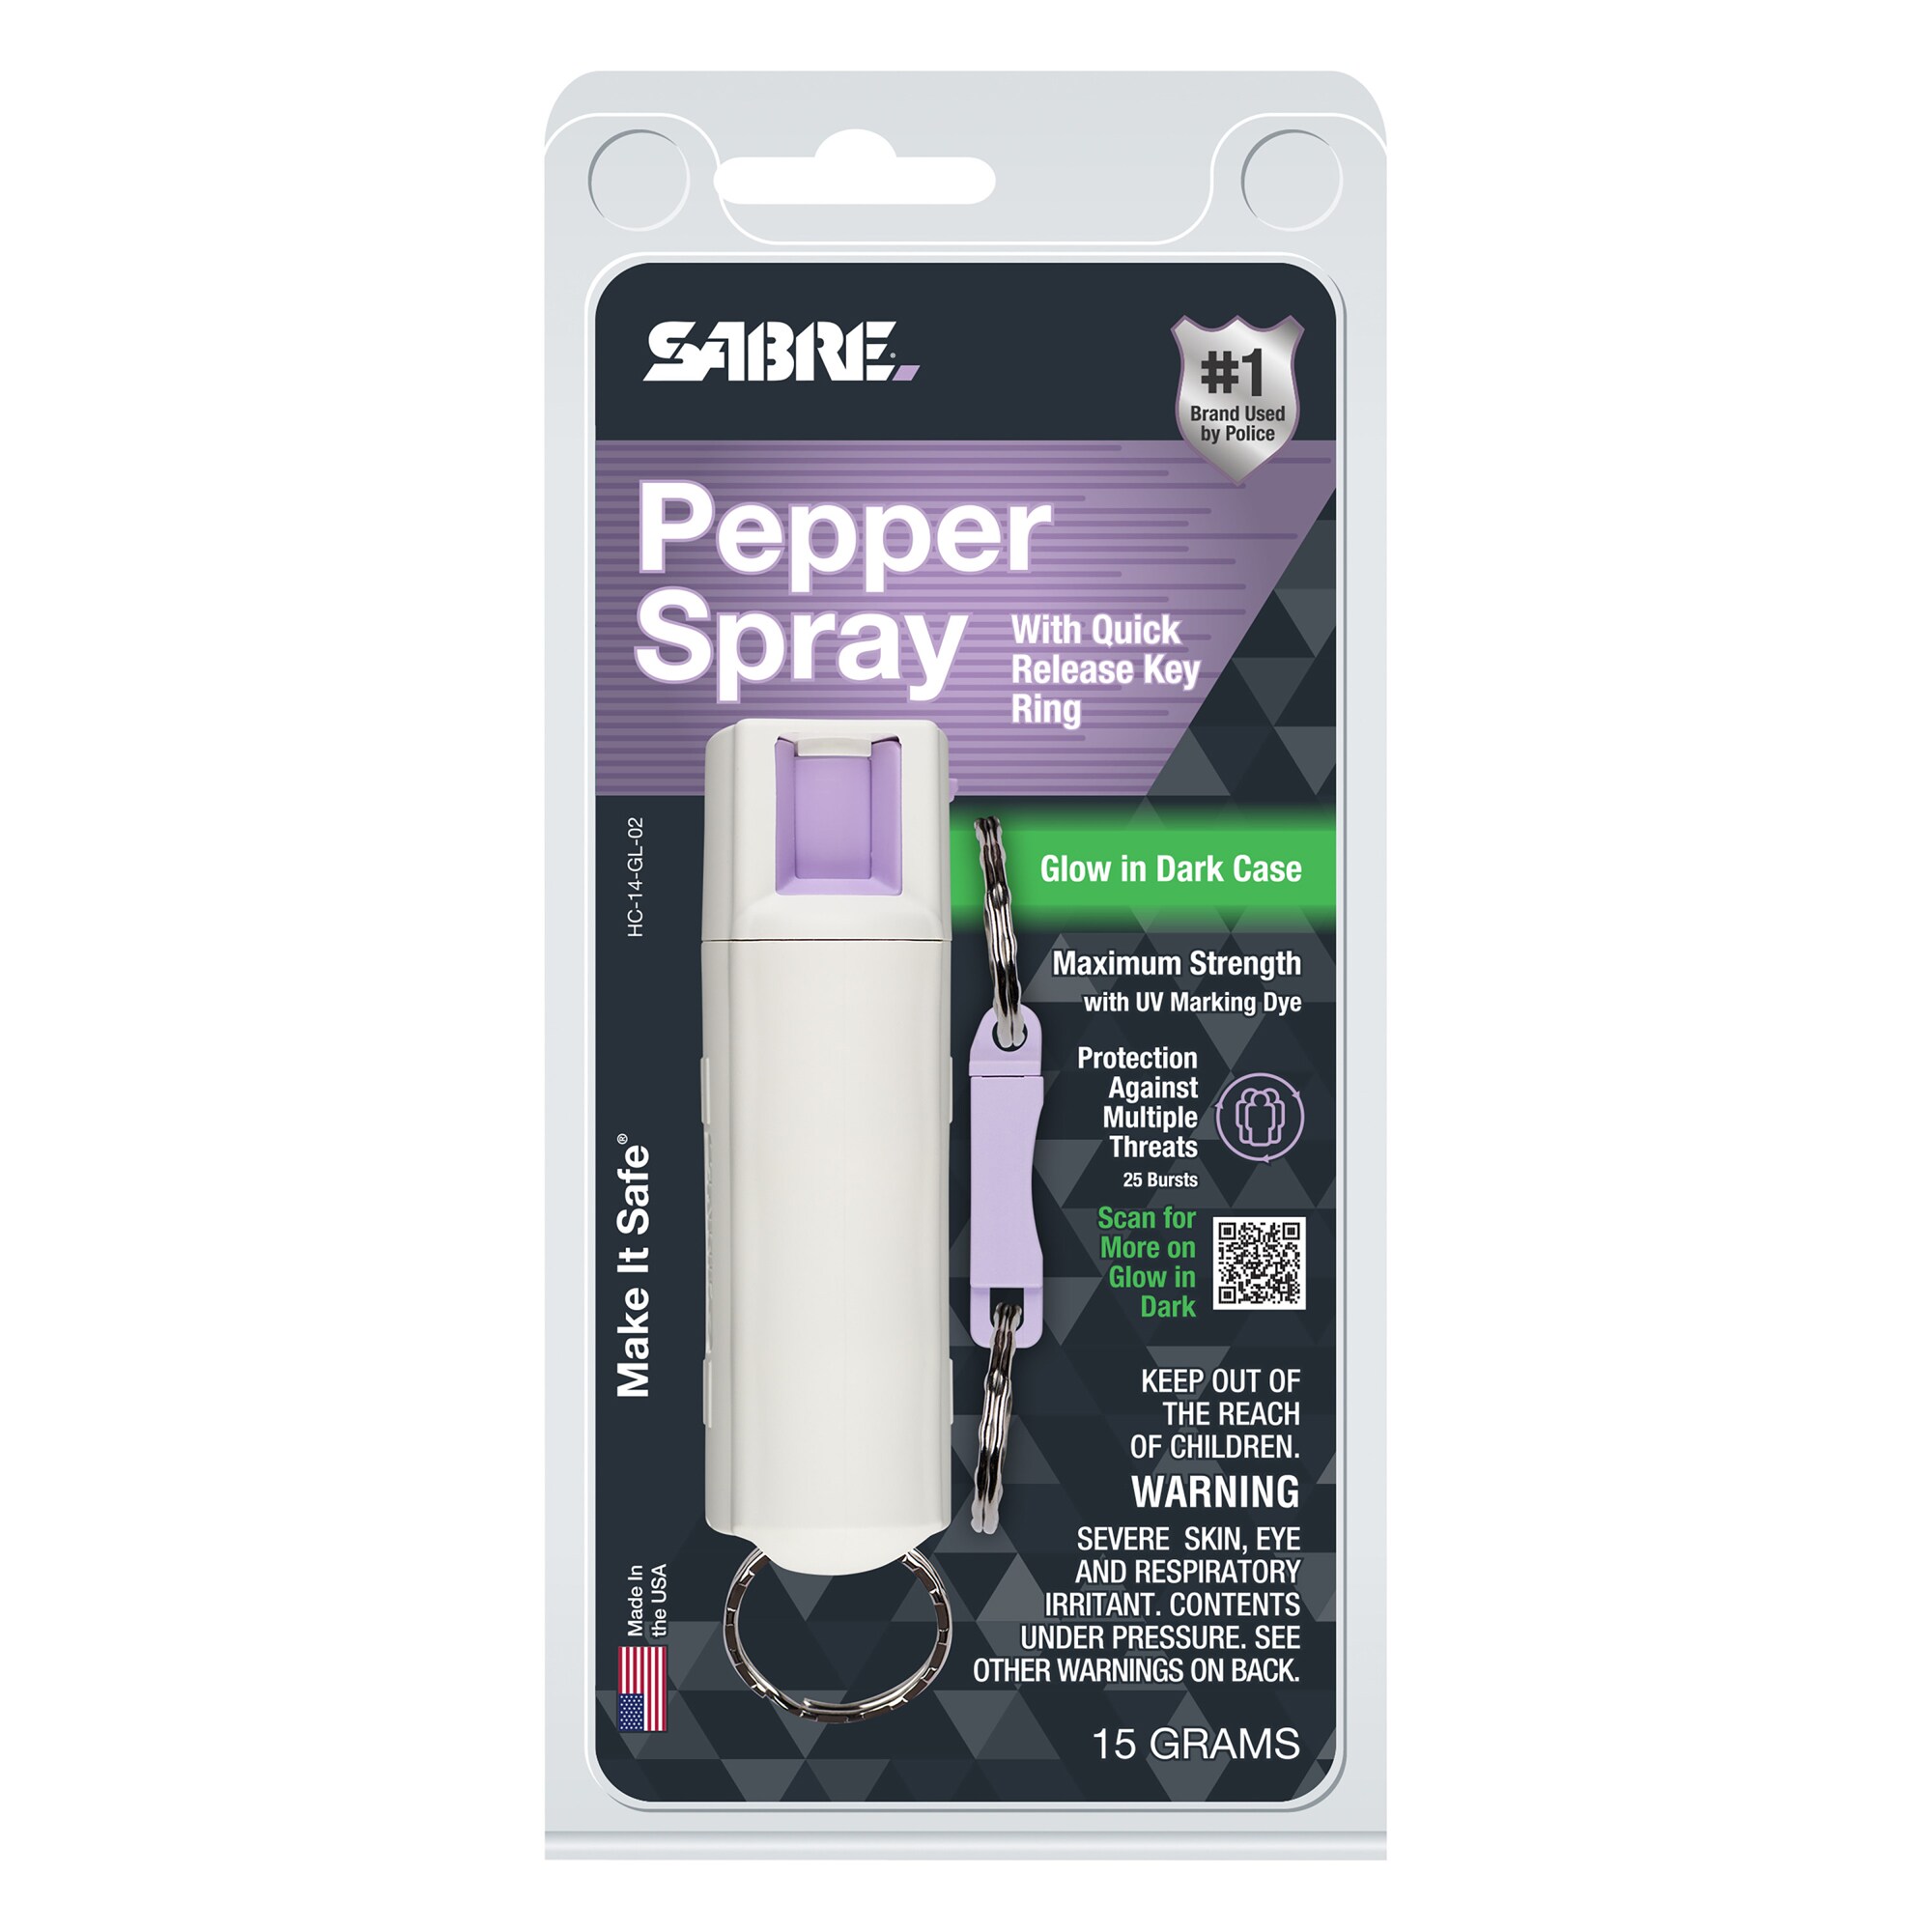 SABRE Pepper Spray with Glow In The Dark Case, Quick Release Key Ring,  Twist Lock Safety, 25 Bursts in the Pepper Spray department at